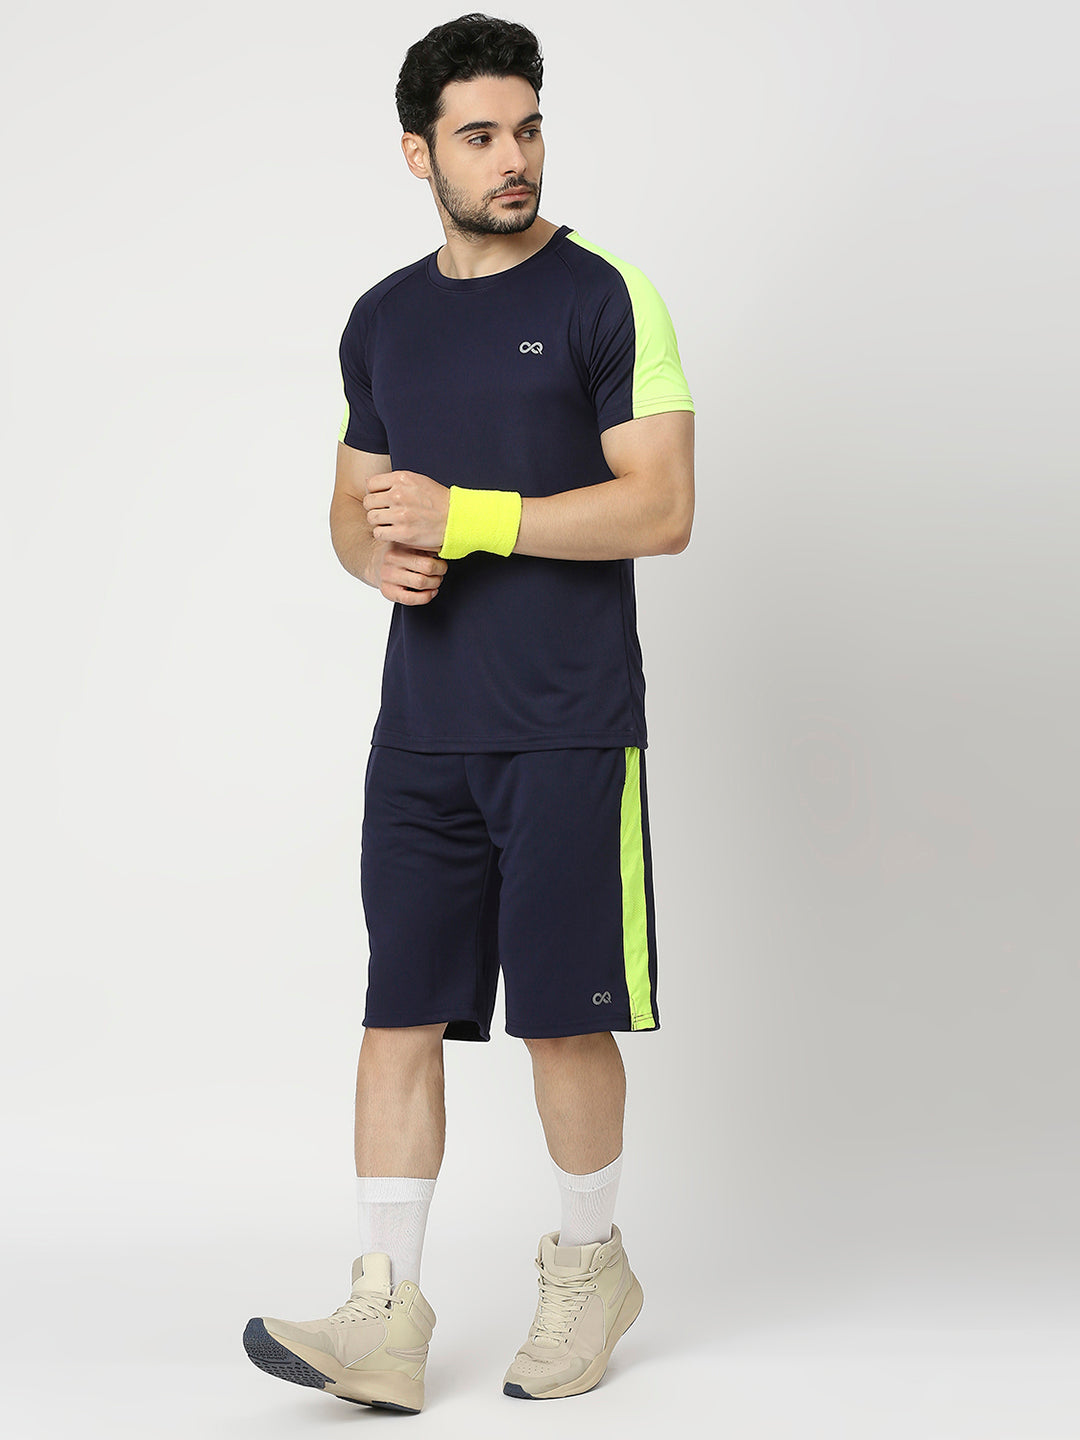 Men's Sports Shorts - Navy Blue and Neon Green